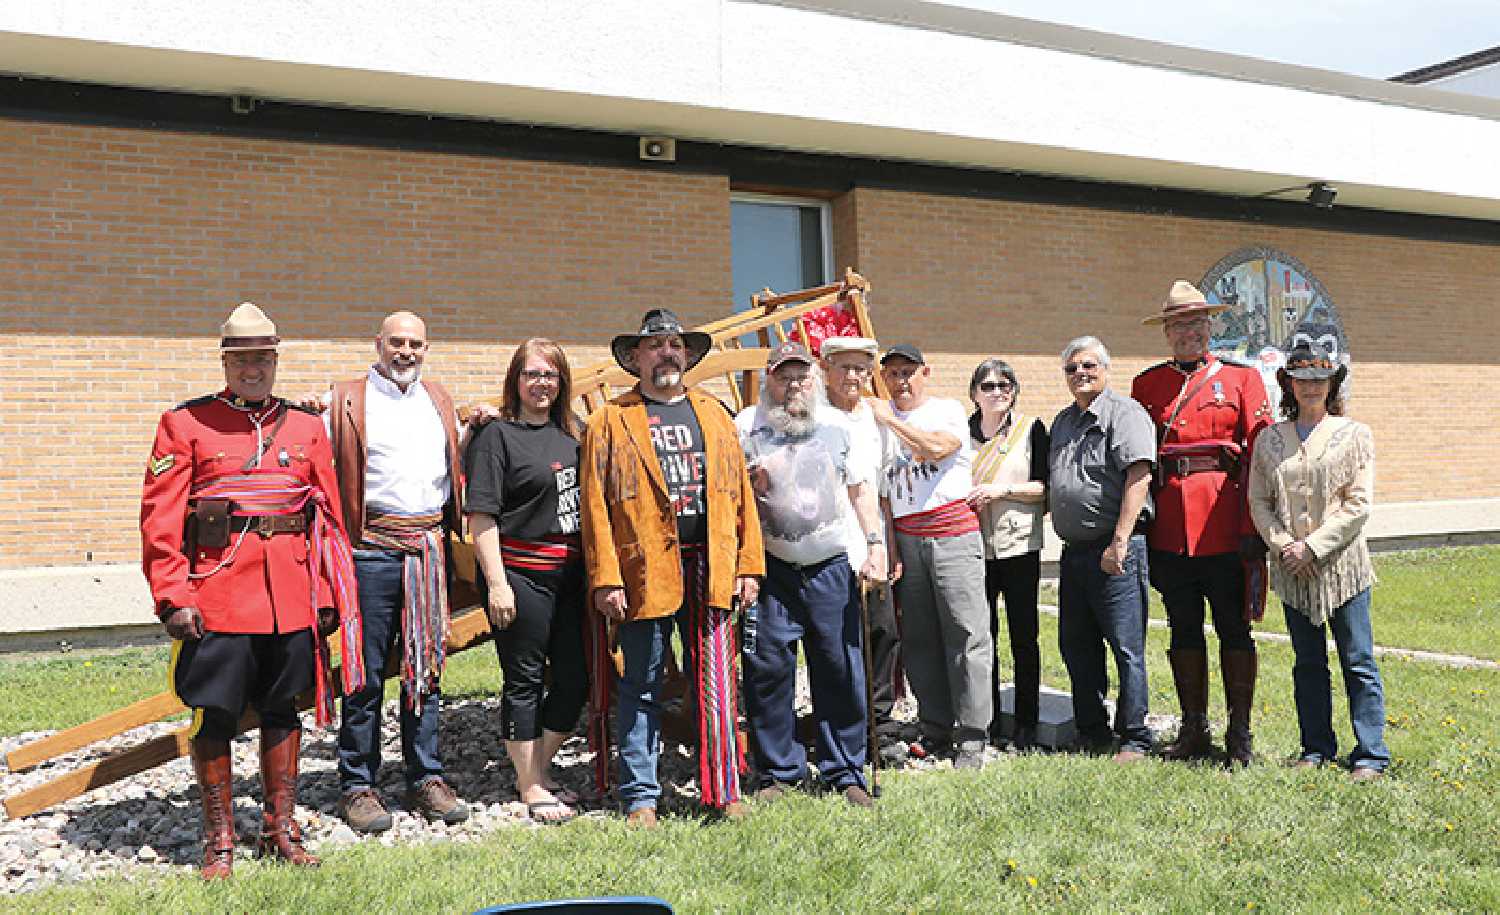 Prairie Mountain RCMP, Manitoba Métis Federation officials, Jerome Cartworks and a few elders from the community came together for the unveiling of the Red River cart at École Saint-Lazare, on May 27 in St. Lazare, Manitoba.